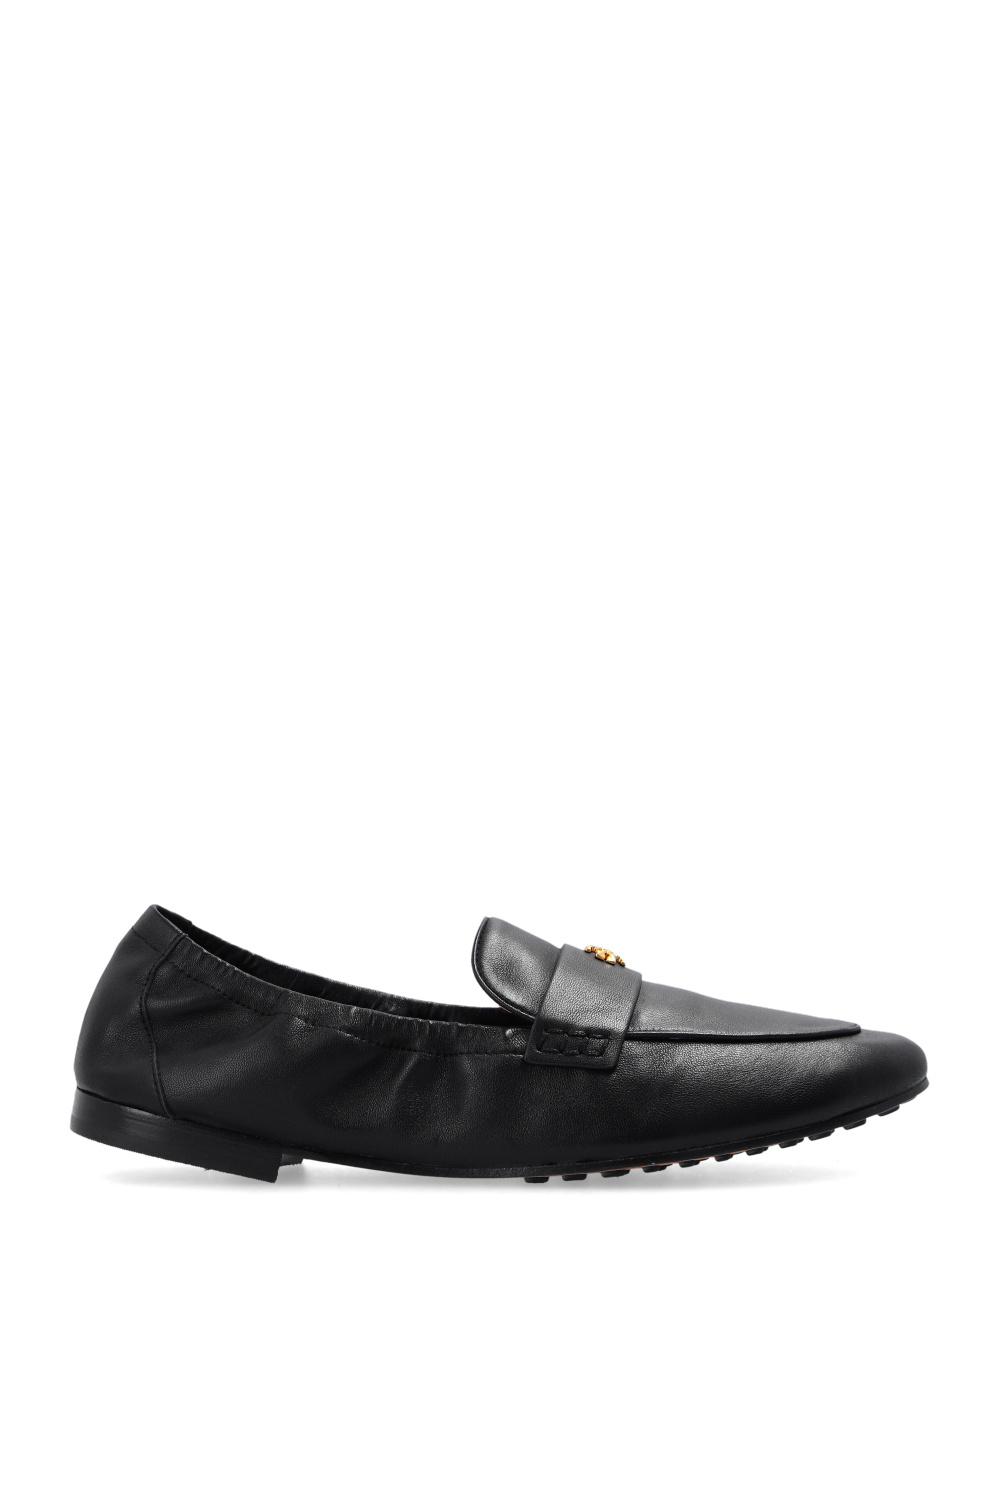 IetpShops Canada - Leather loafers Tory Burch - Heres a shoe thats likely  to rub a few die-hard